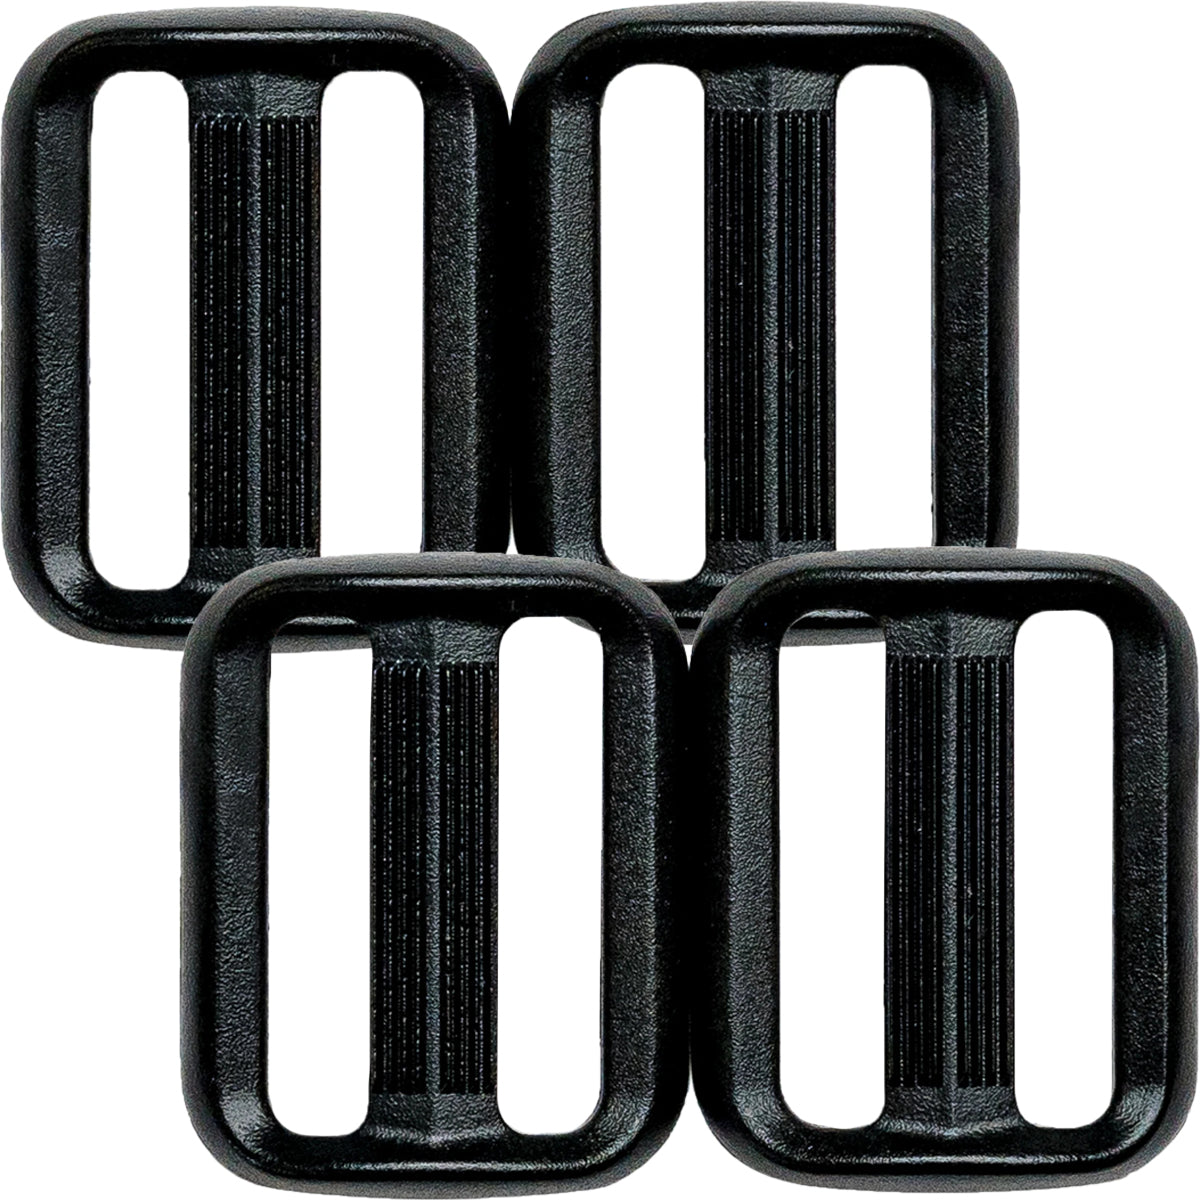 Gear Aid No-Sew Replacement Tri-Glides - 2-Pack Gear Aid